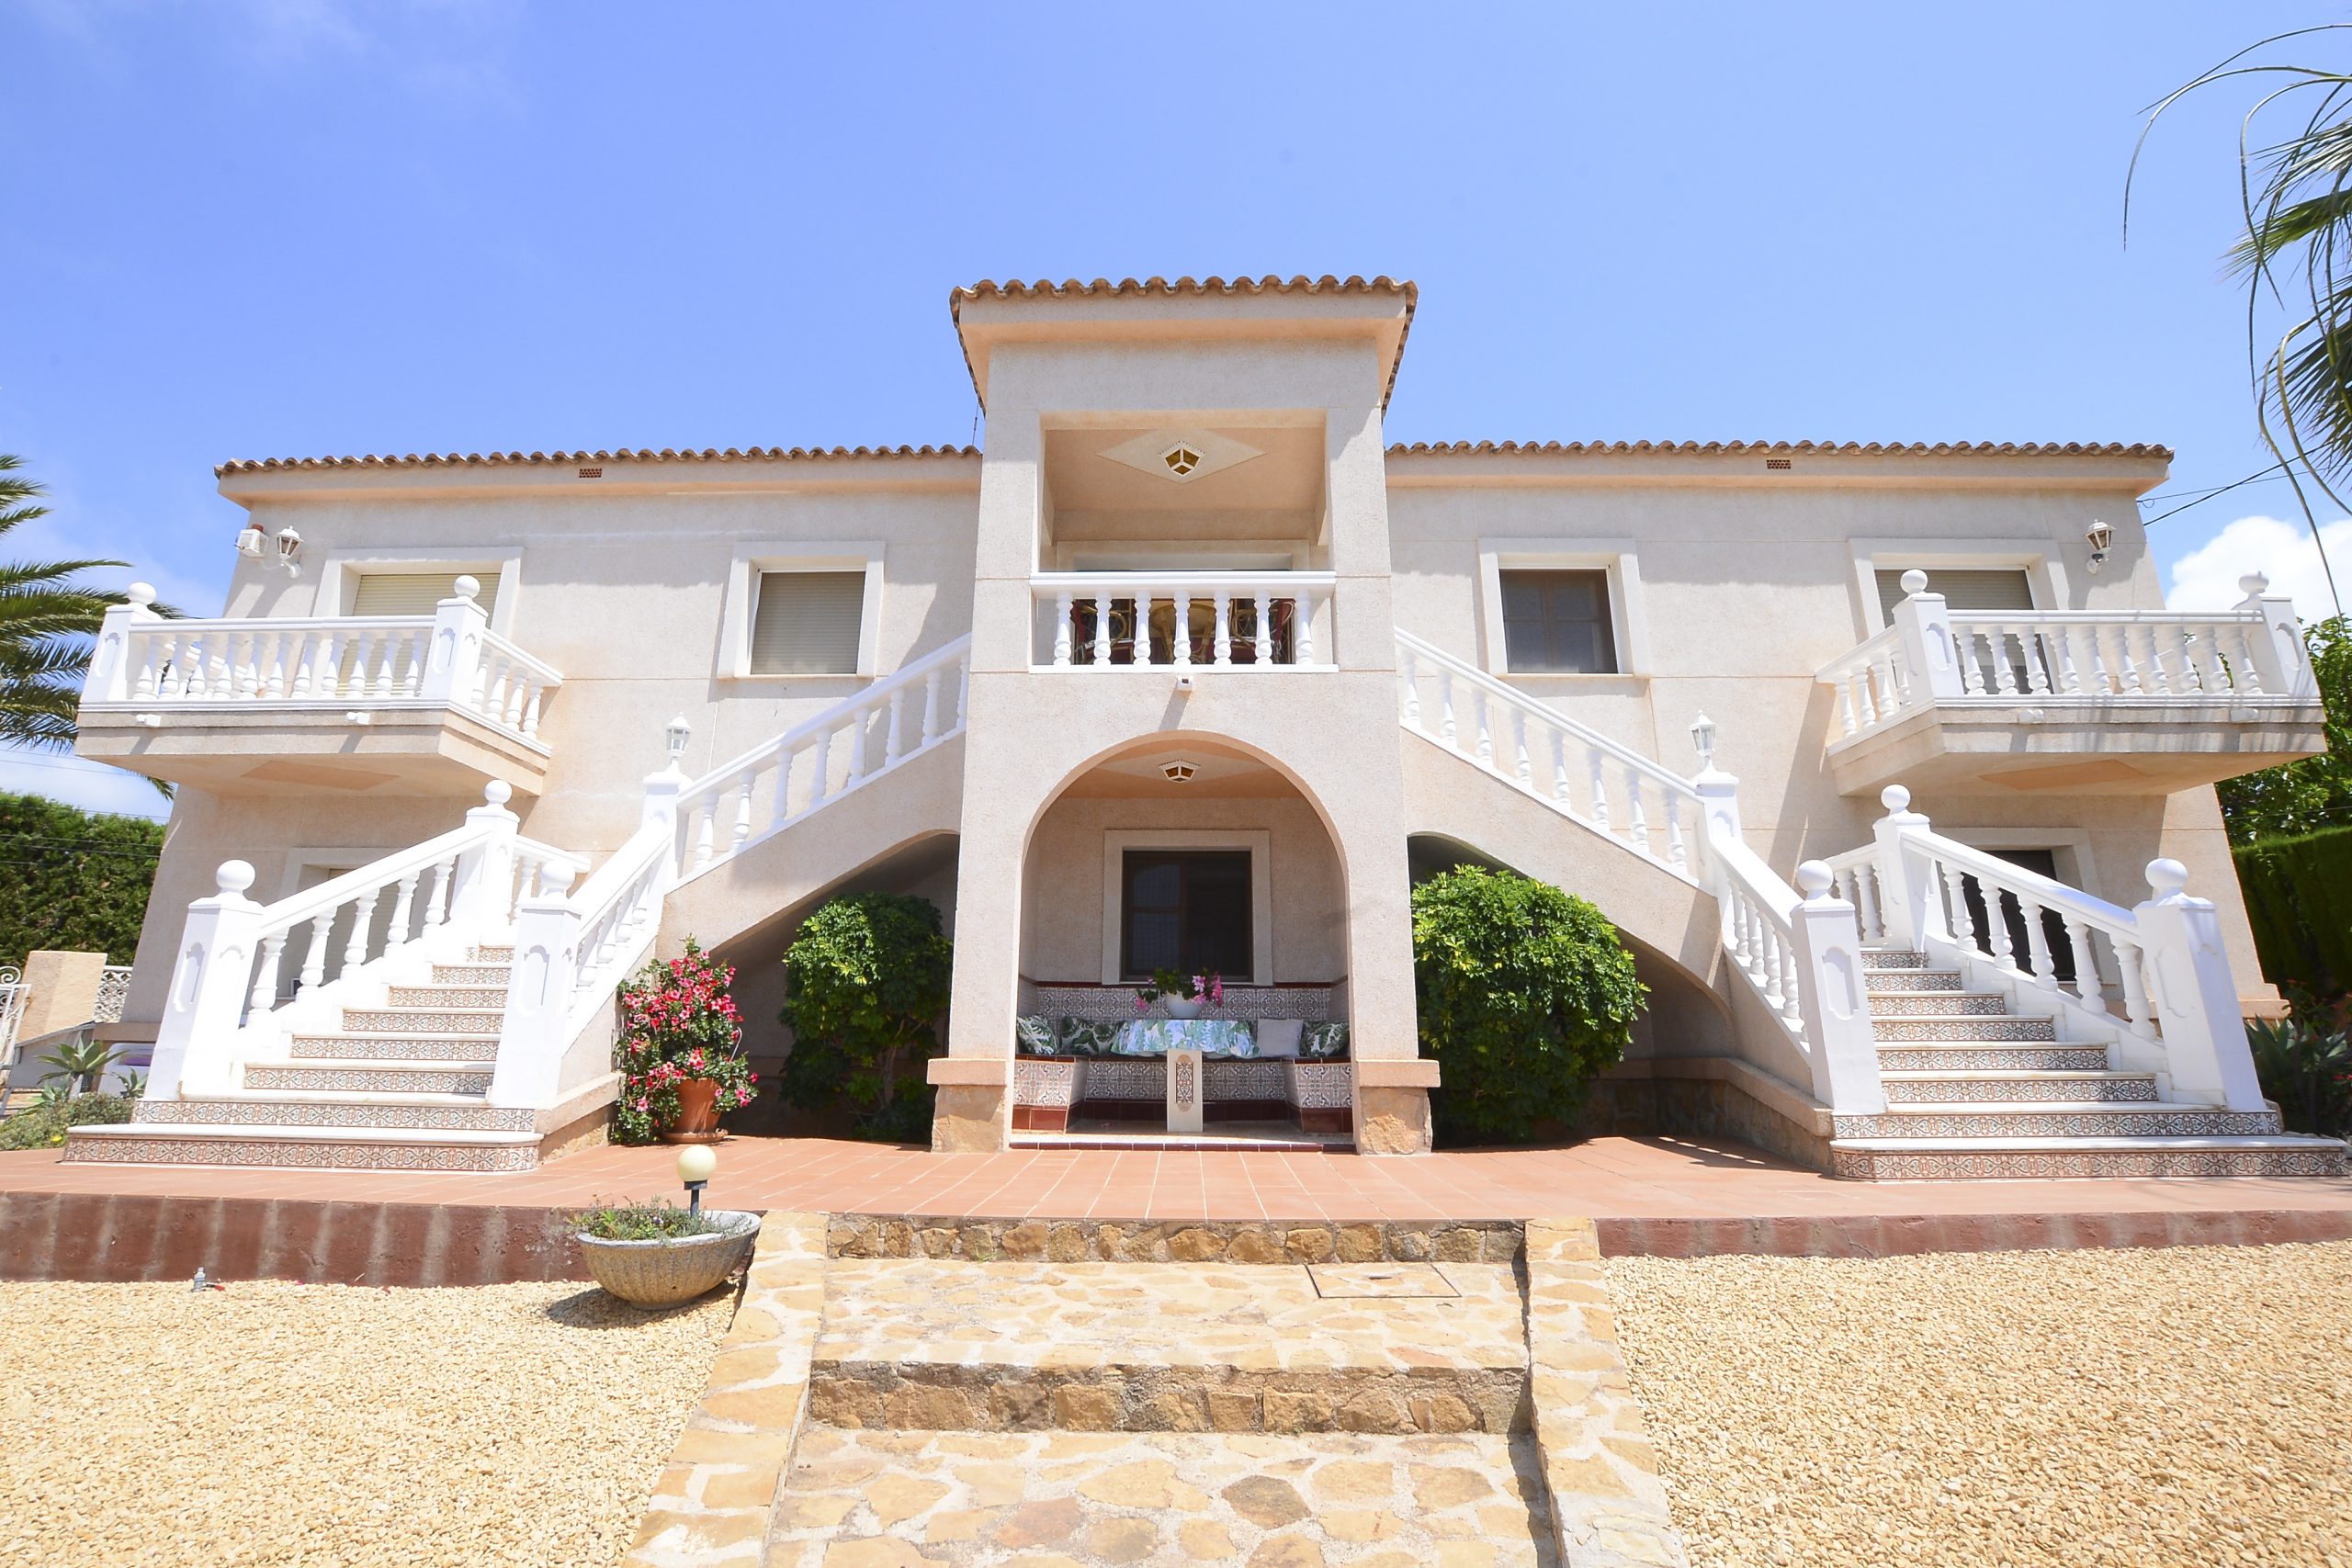 5 bed villa in mansion style with distance sea views in Calpe